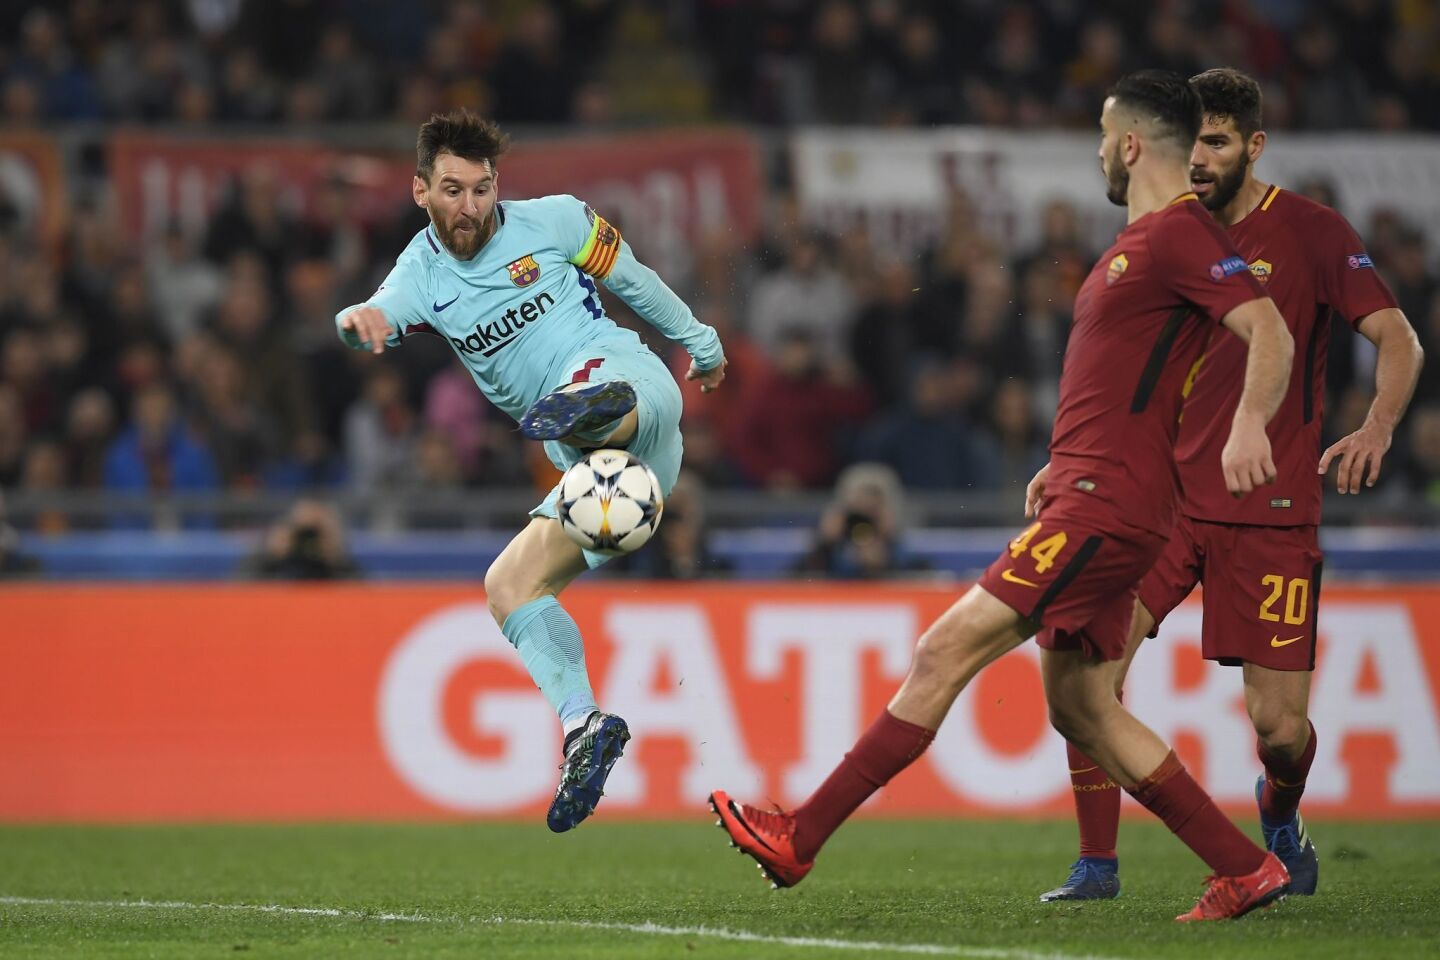 FC Barcelona's Argentinian forward Lionel Messi kicks the ball during the UEFA Champions League quarter-final second leg football match between AS Roma and FC Barcelona at the Olympic Stadium in Rome on April 10, 2018.